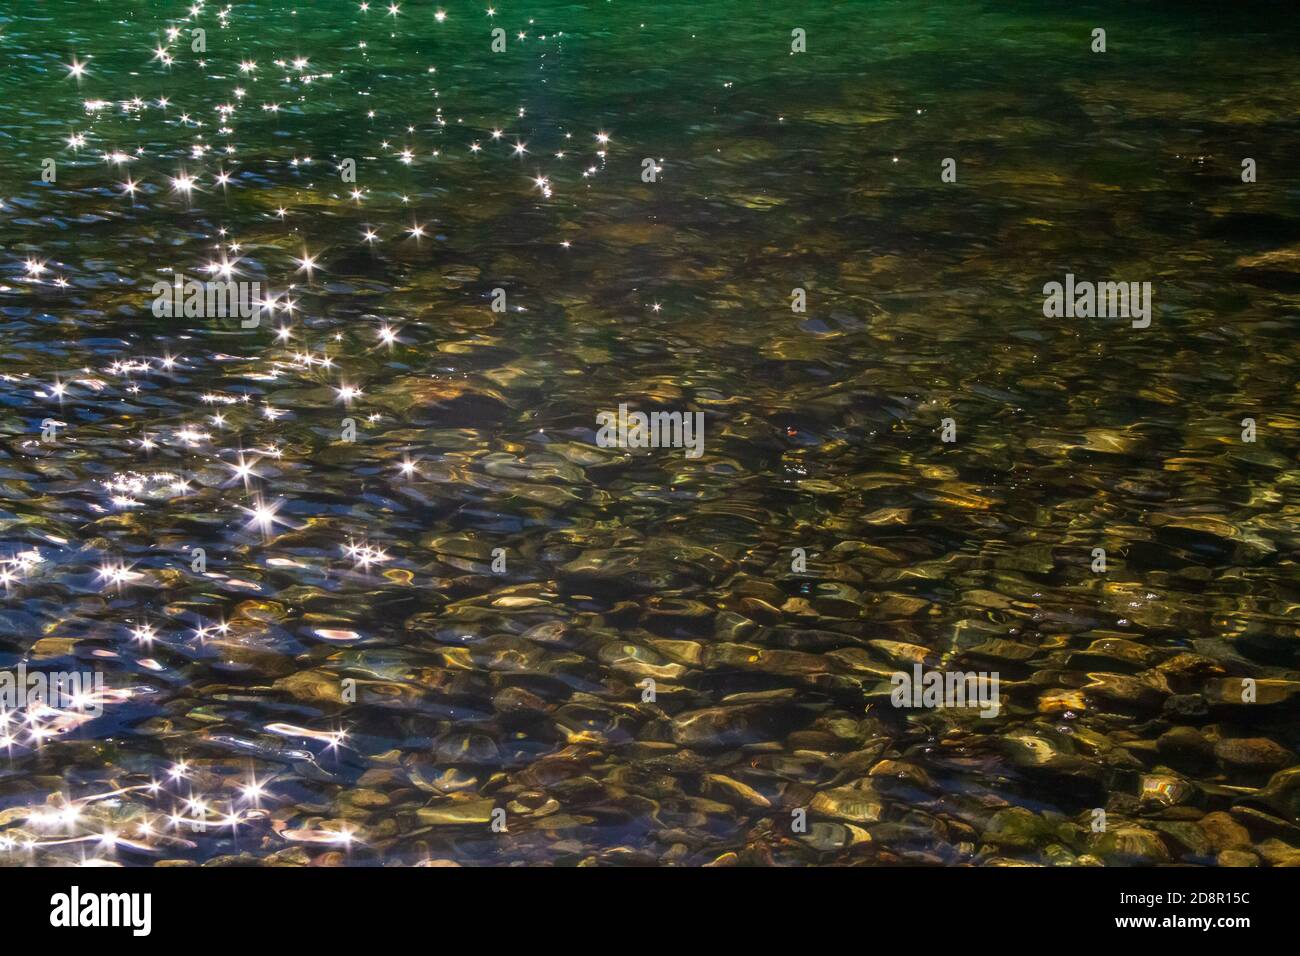 Reflected sunlight on water, with rocks and oysters below the surface. Stock Photo